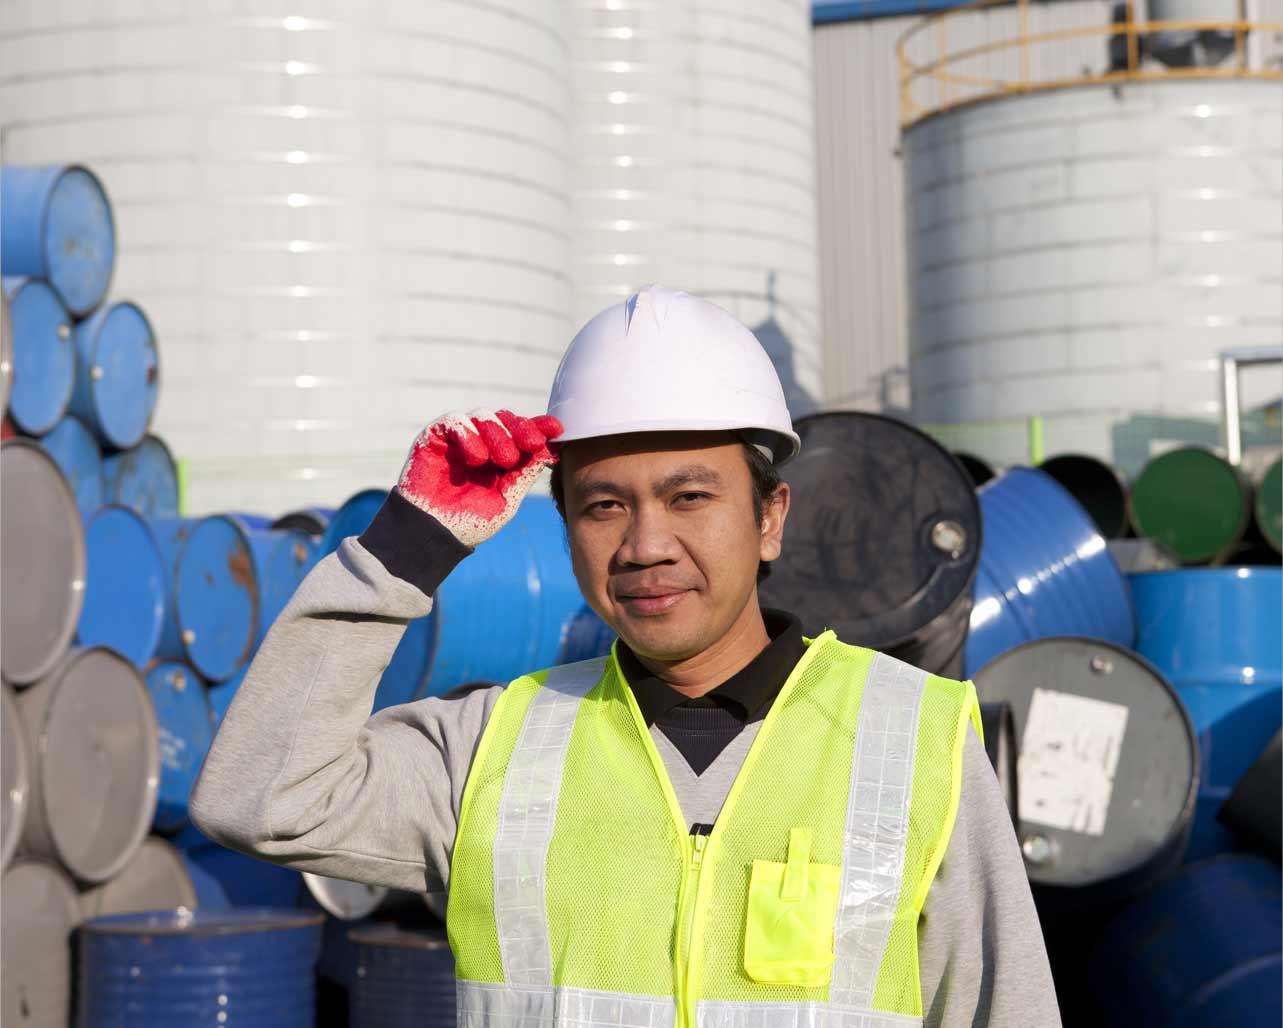 Man wearing safety vest and hard hat stands in front of barrel containers